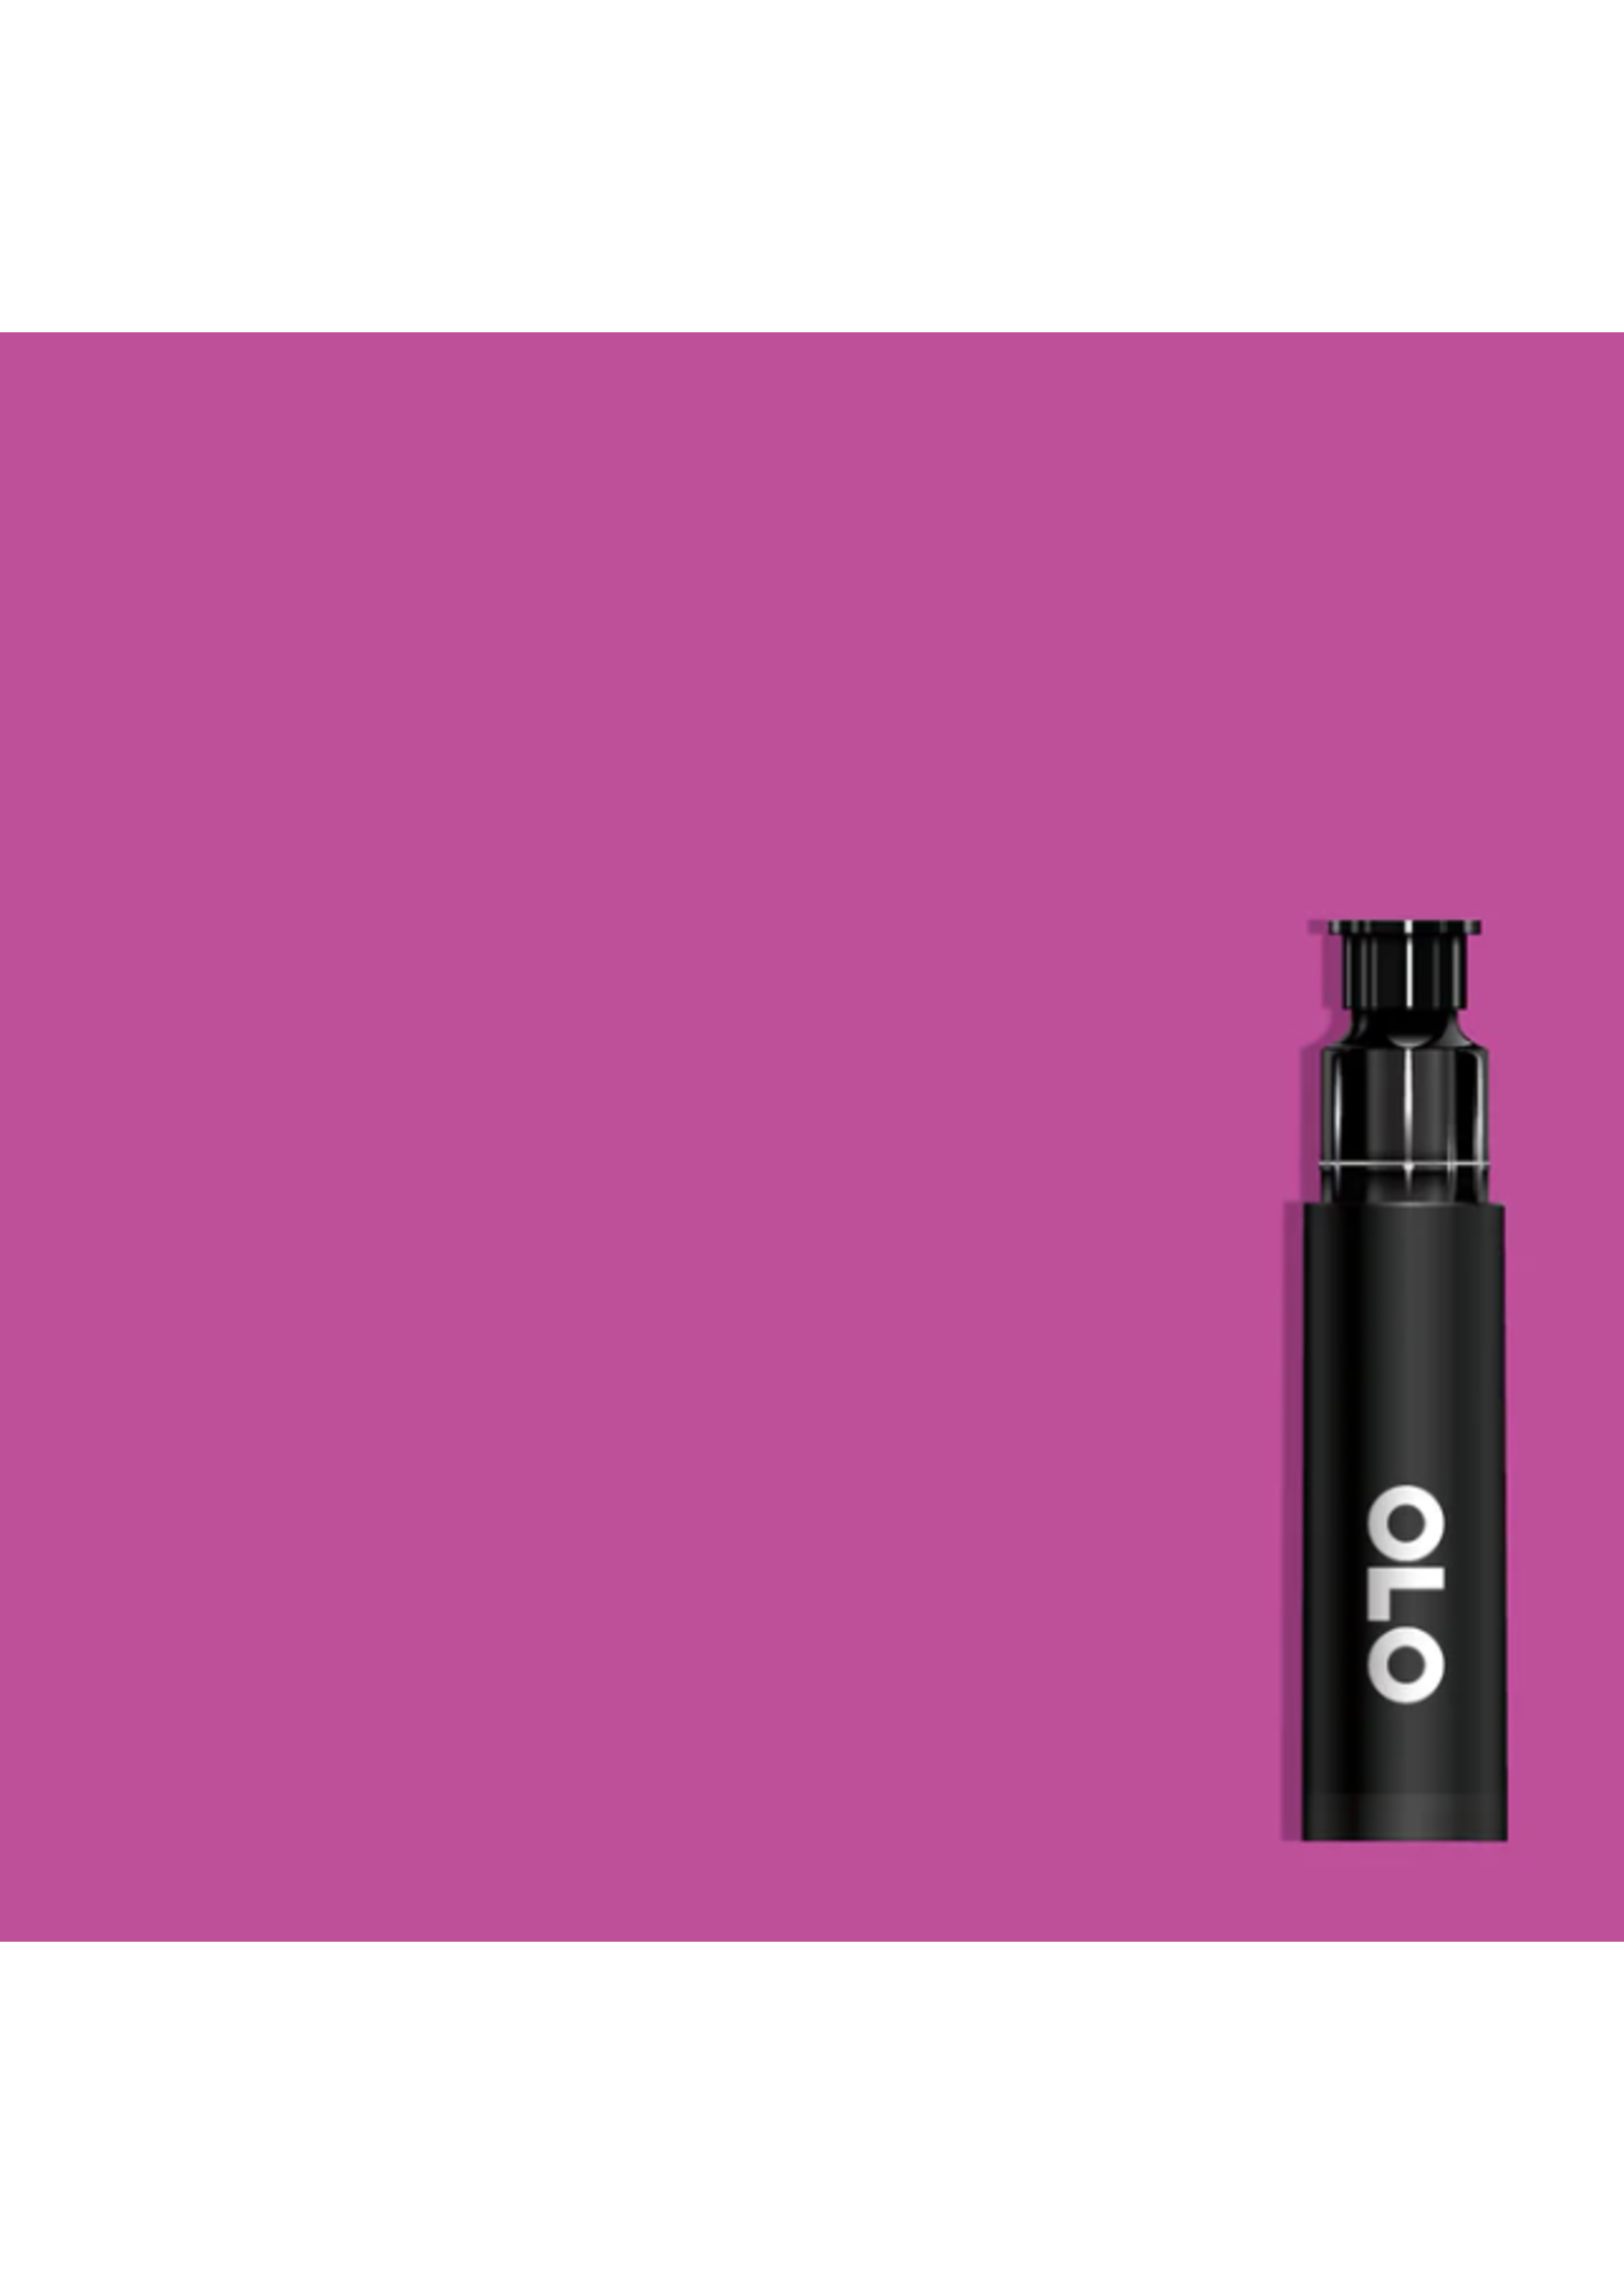 OLO OLO Brush Replacement Cartridge: Aster